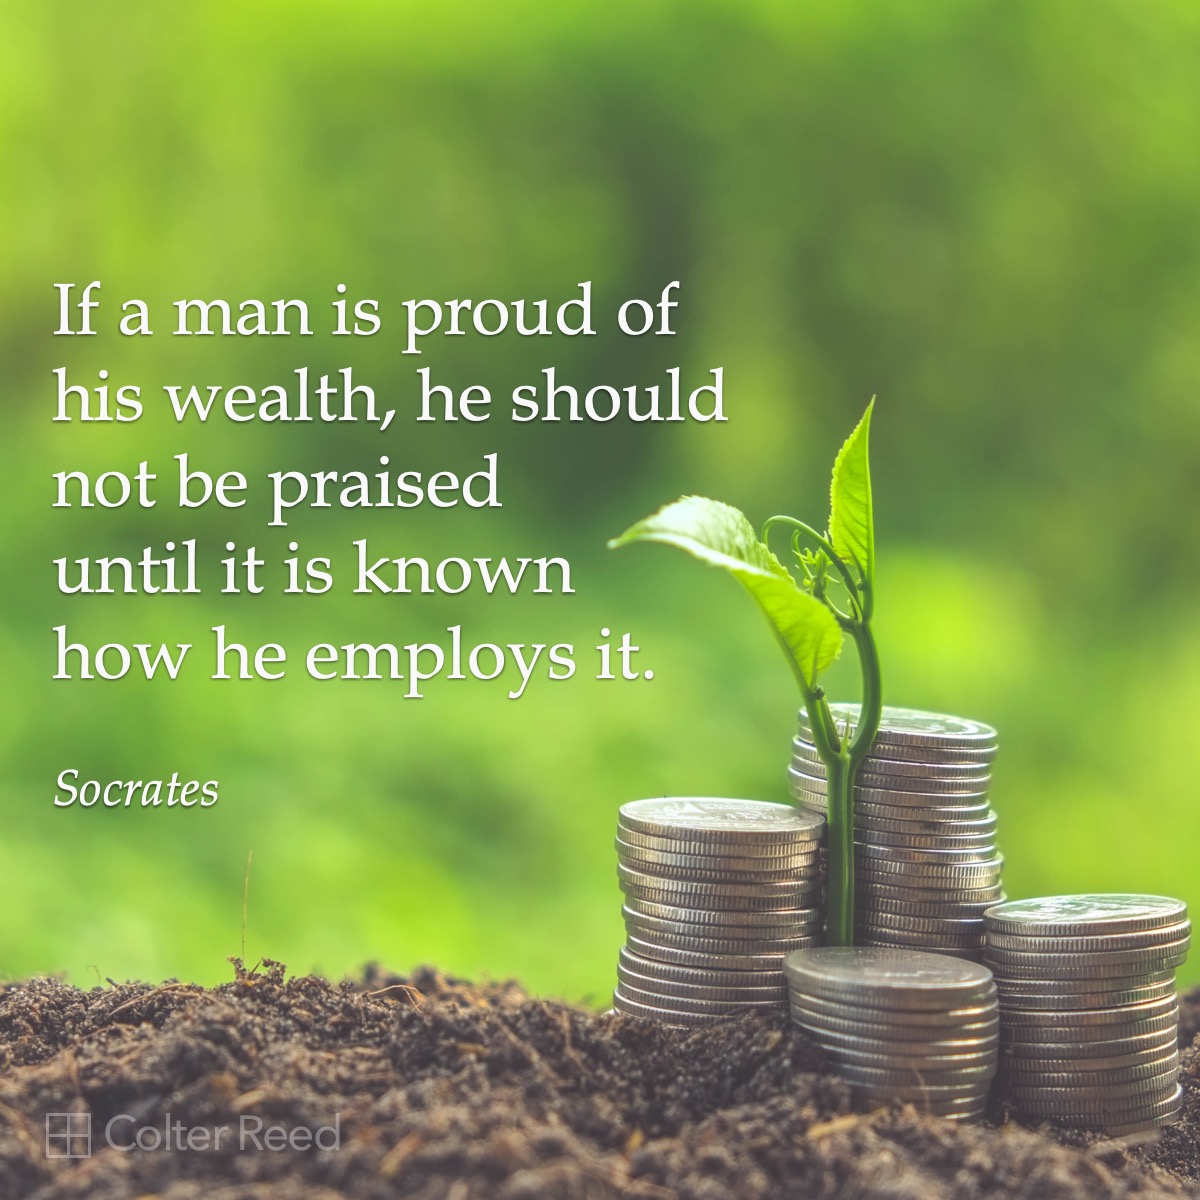 If a man is proud of his wealth, he should not be praised until it is known how he employs it. —Socrates